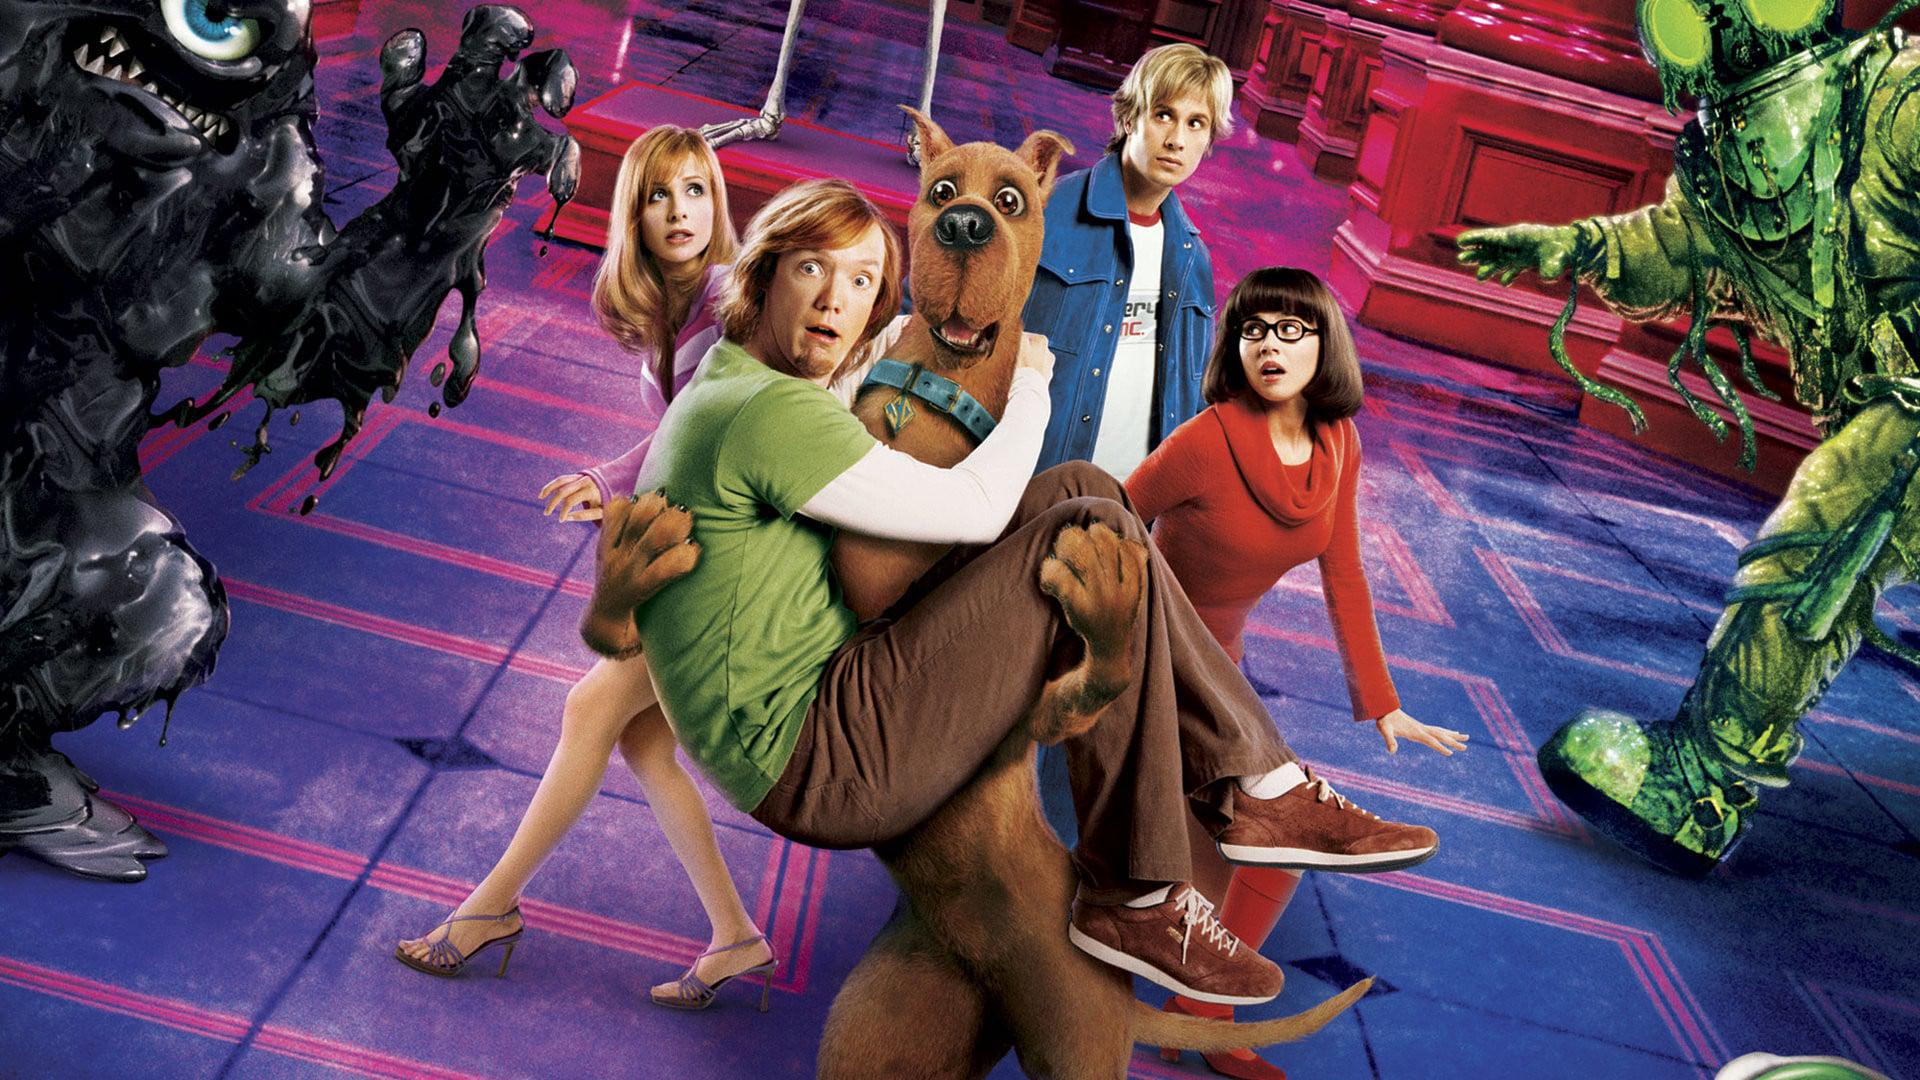 Backdrop Image for Scooby Doo 2: Monsters Unleashed